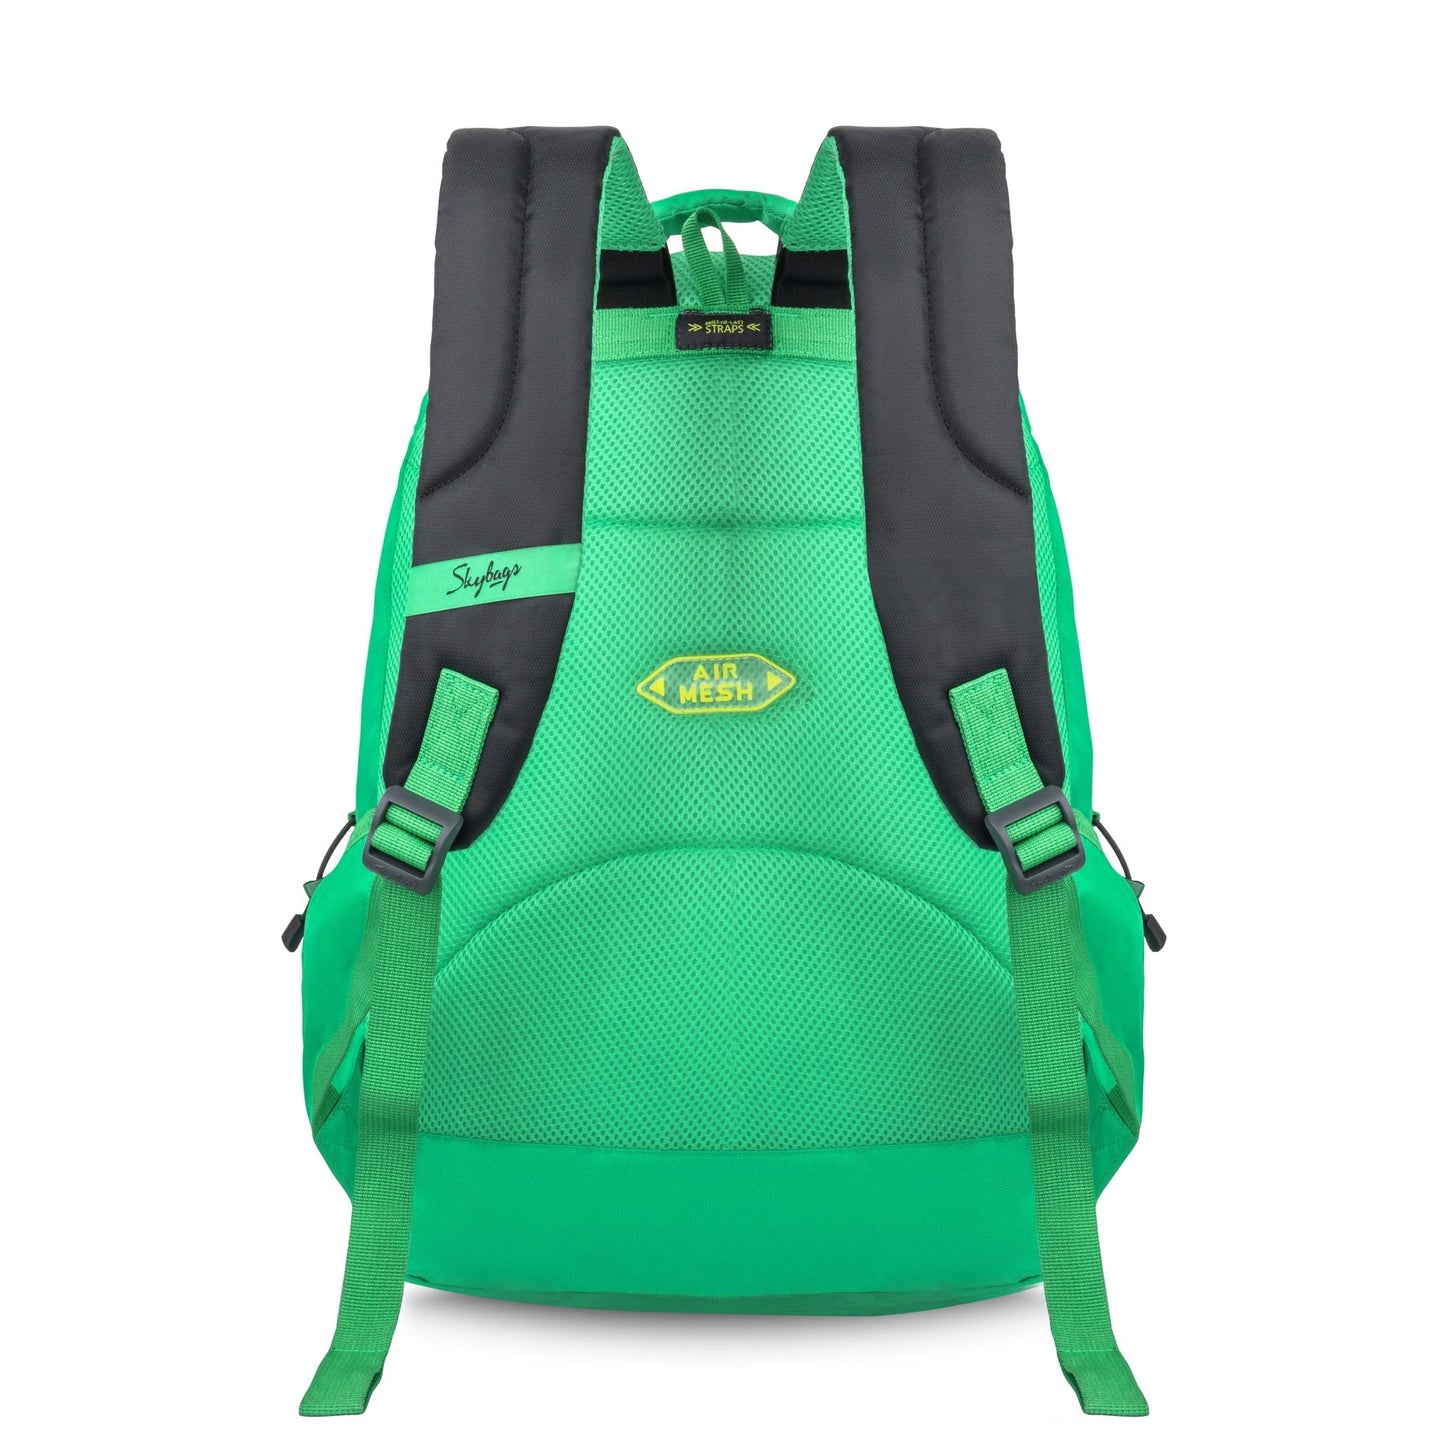 Skybags Squad NXT 04 47L Backpack